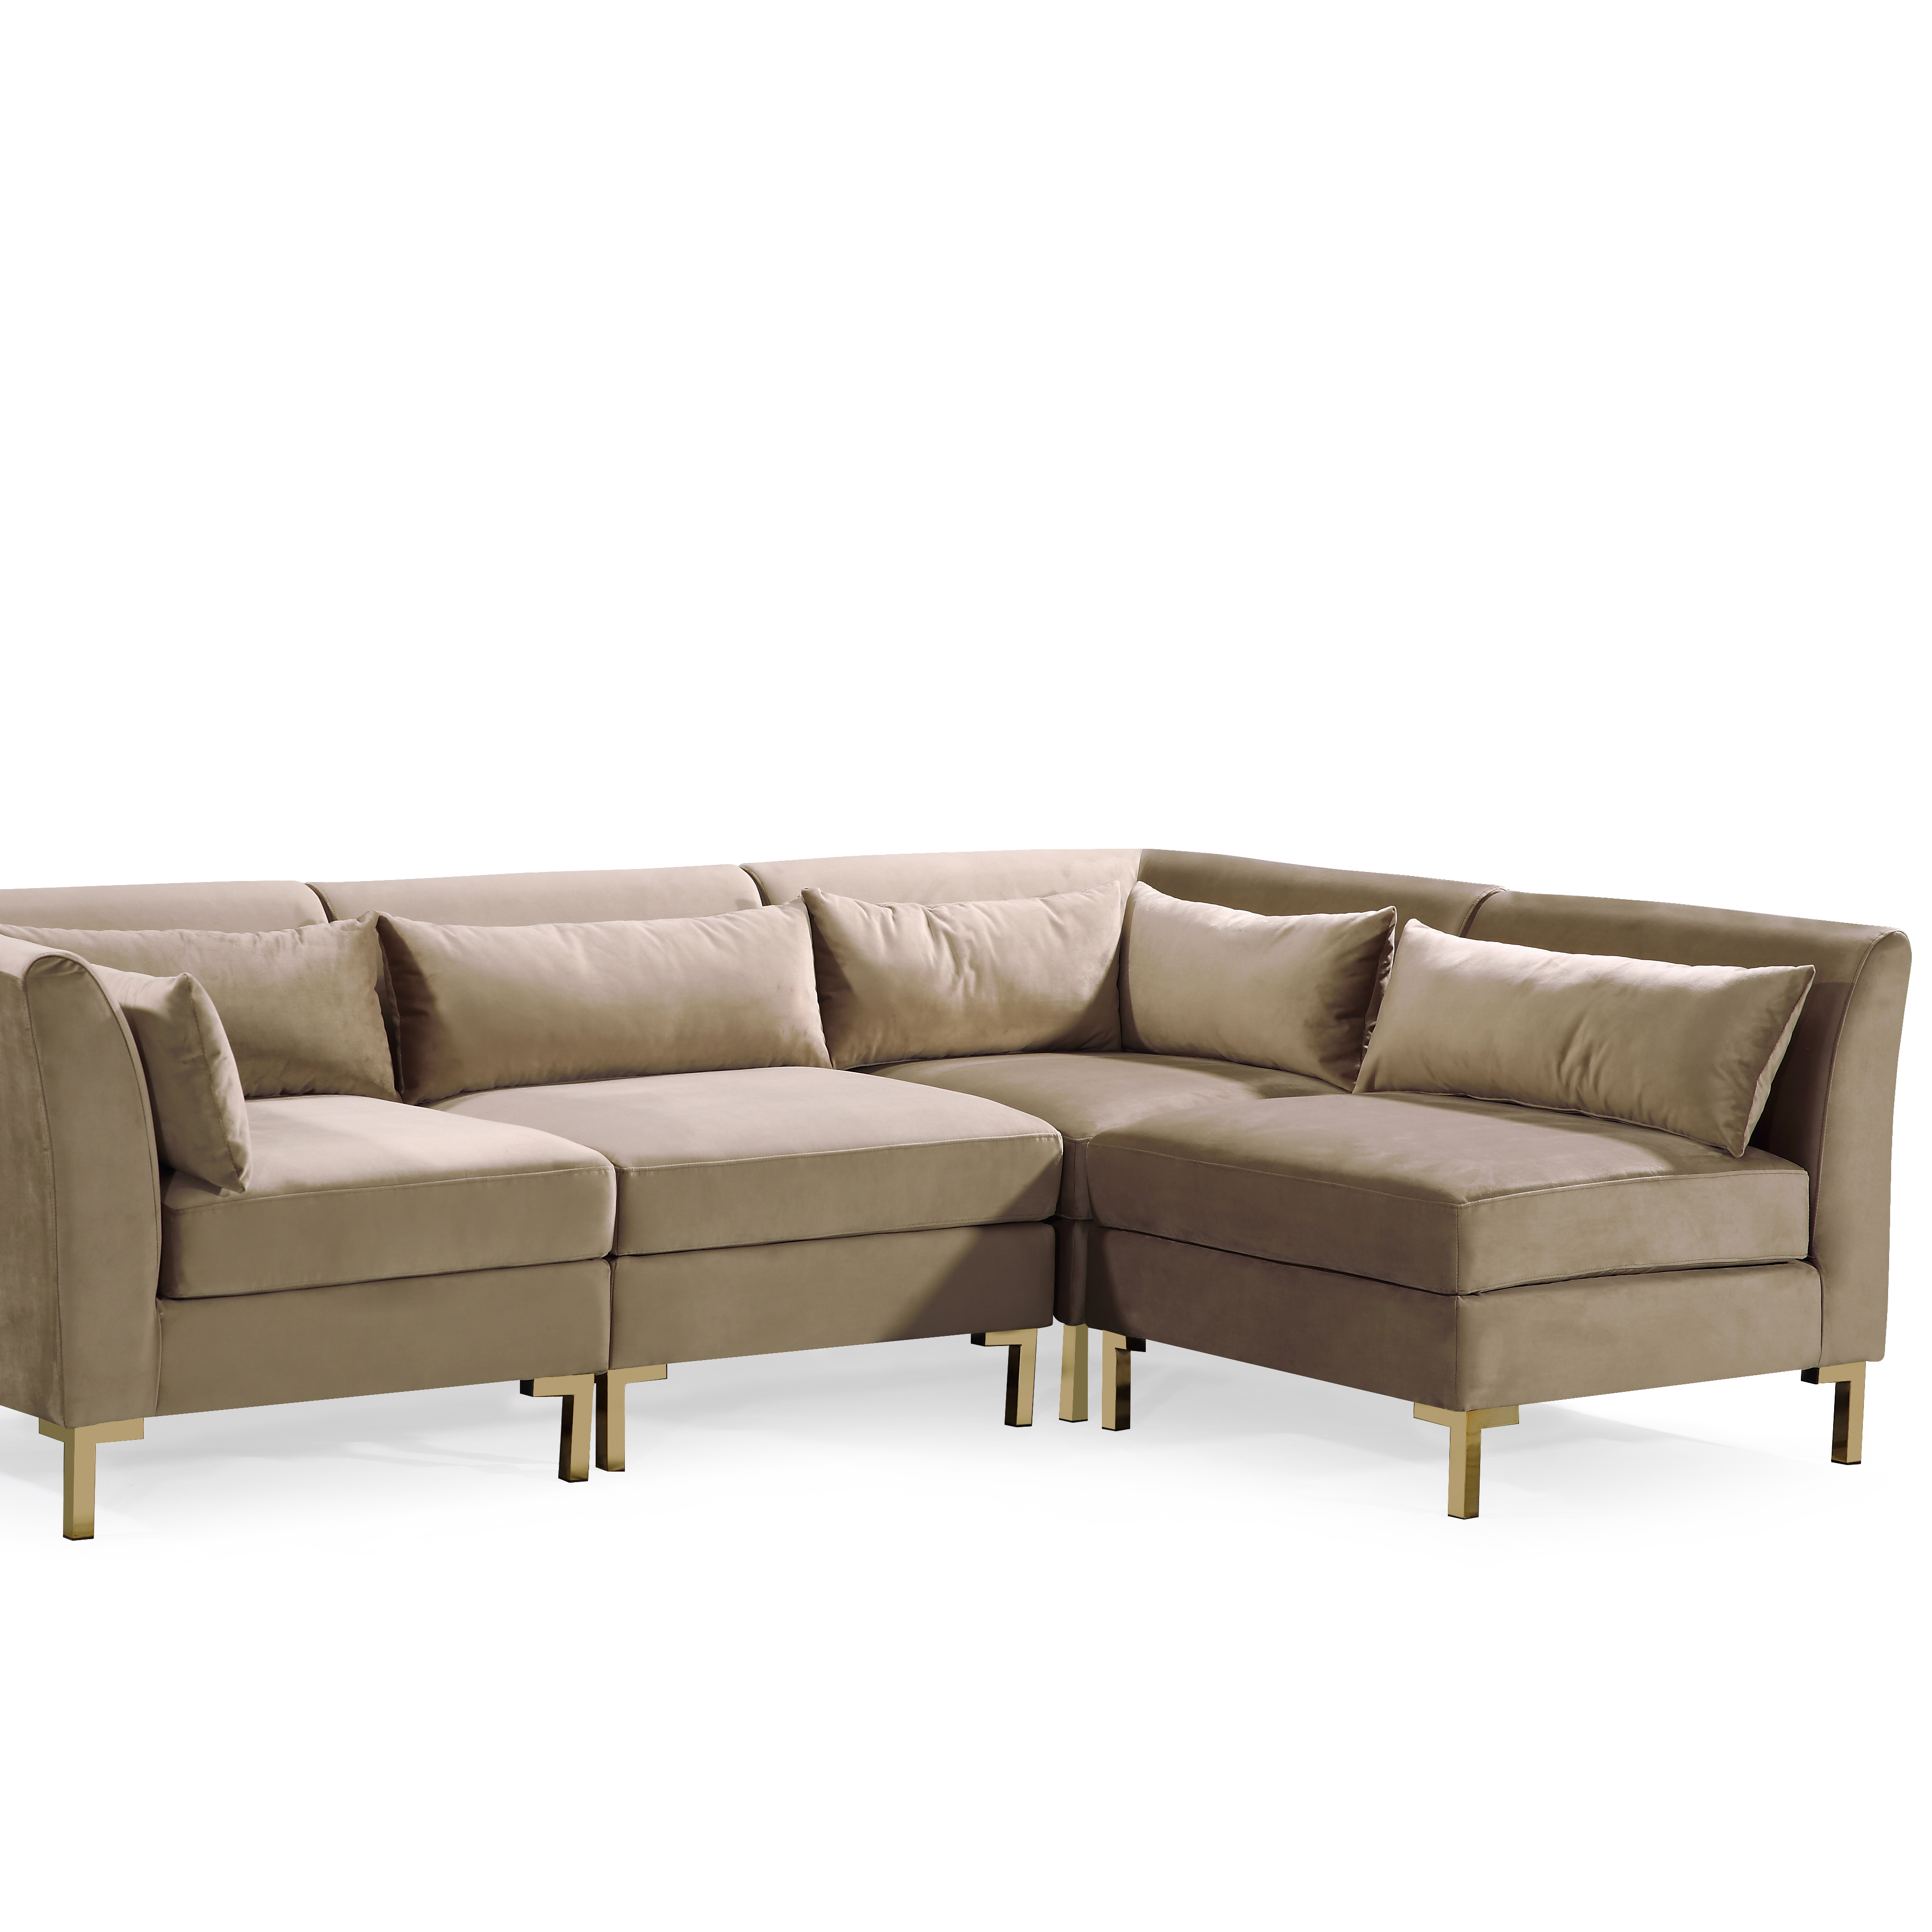 Greco Modular Chaise Sectional Sofa Solid Gold Tone Metal Y-Leg With 6 Throw Pillows - Teal